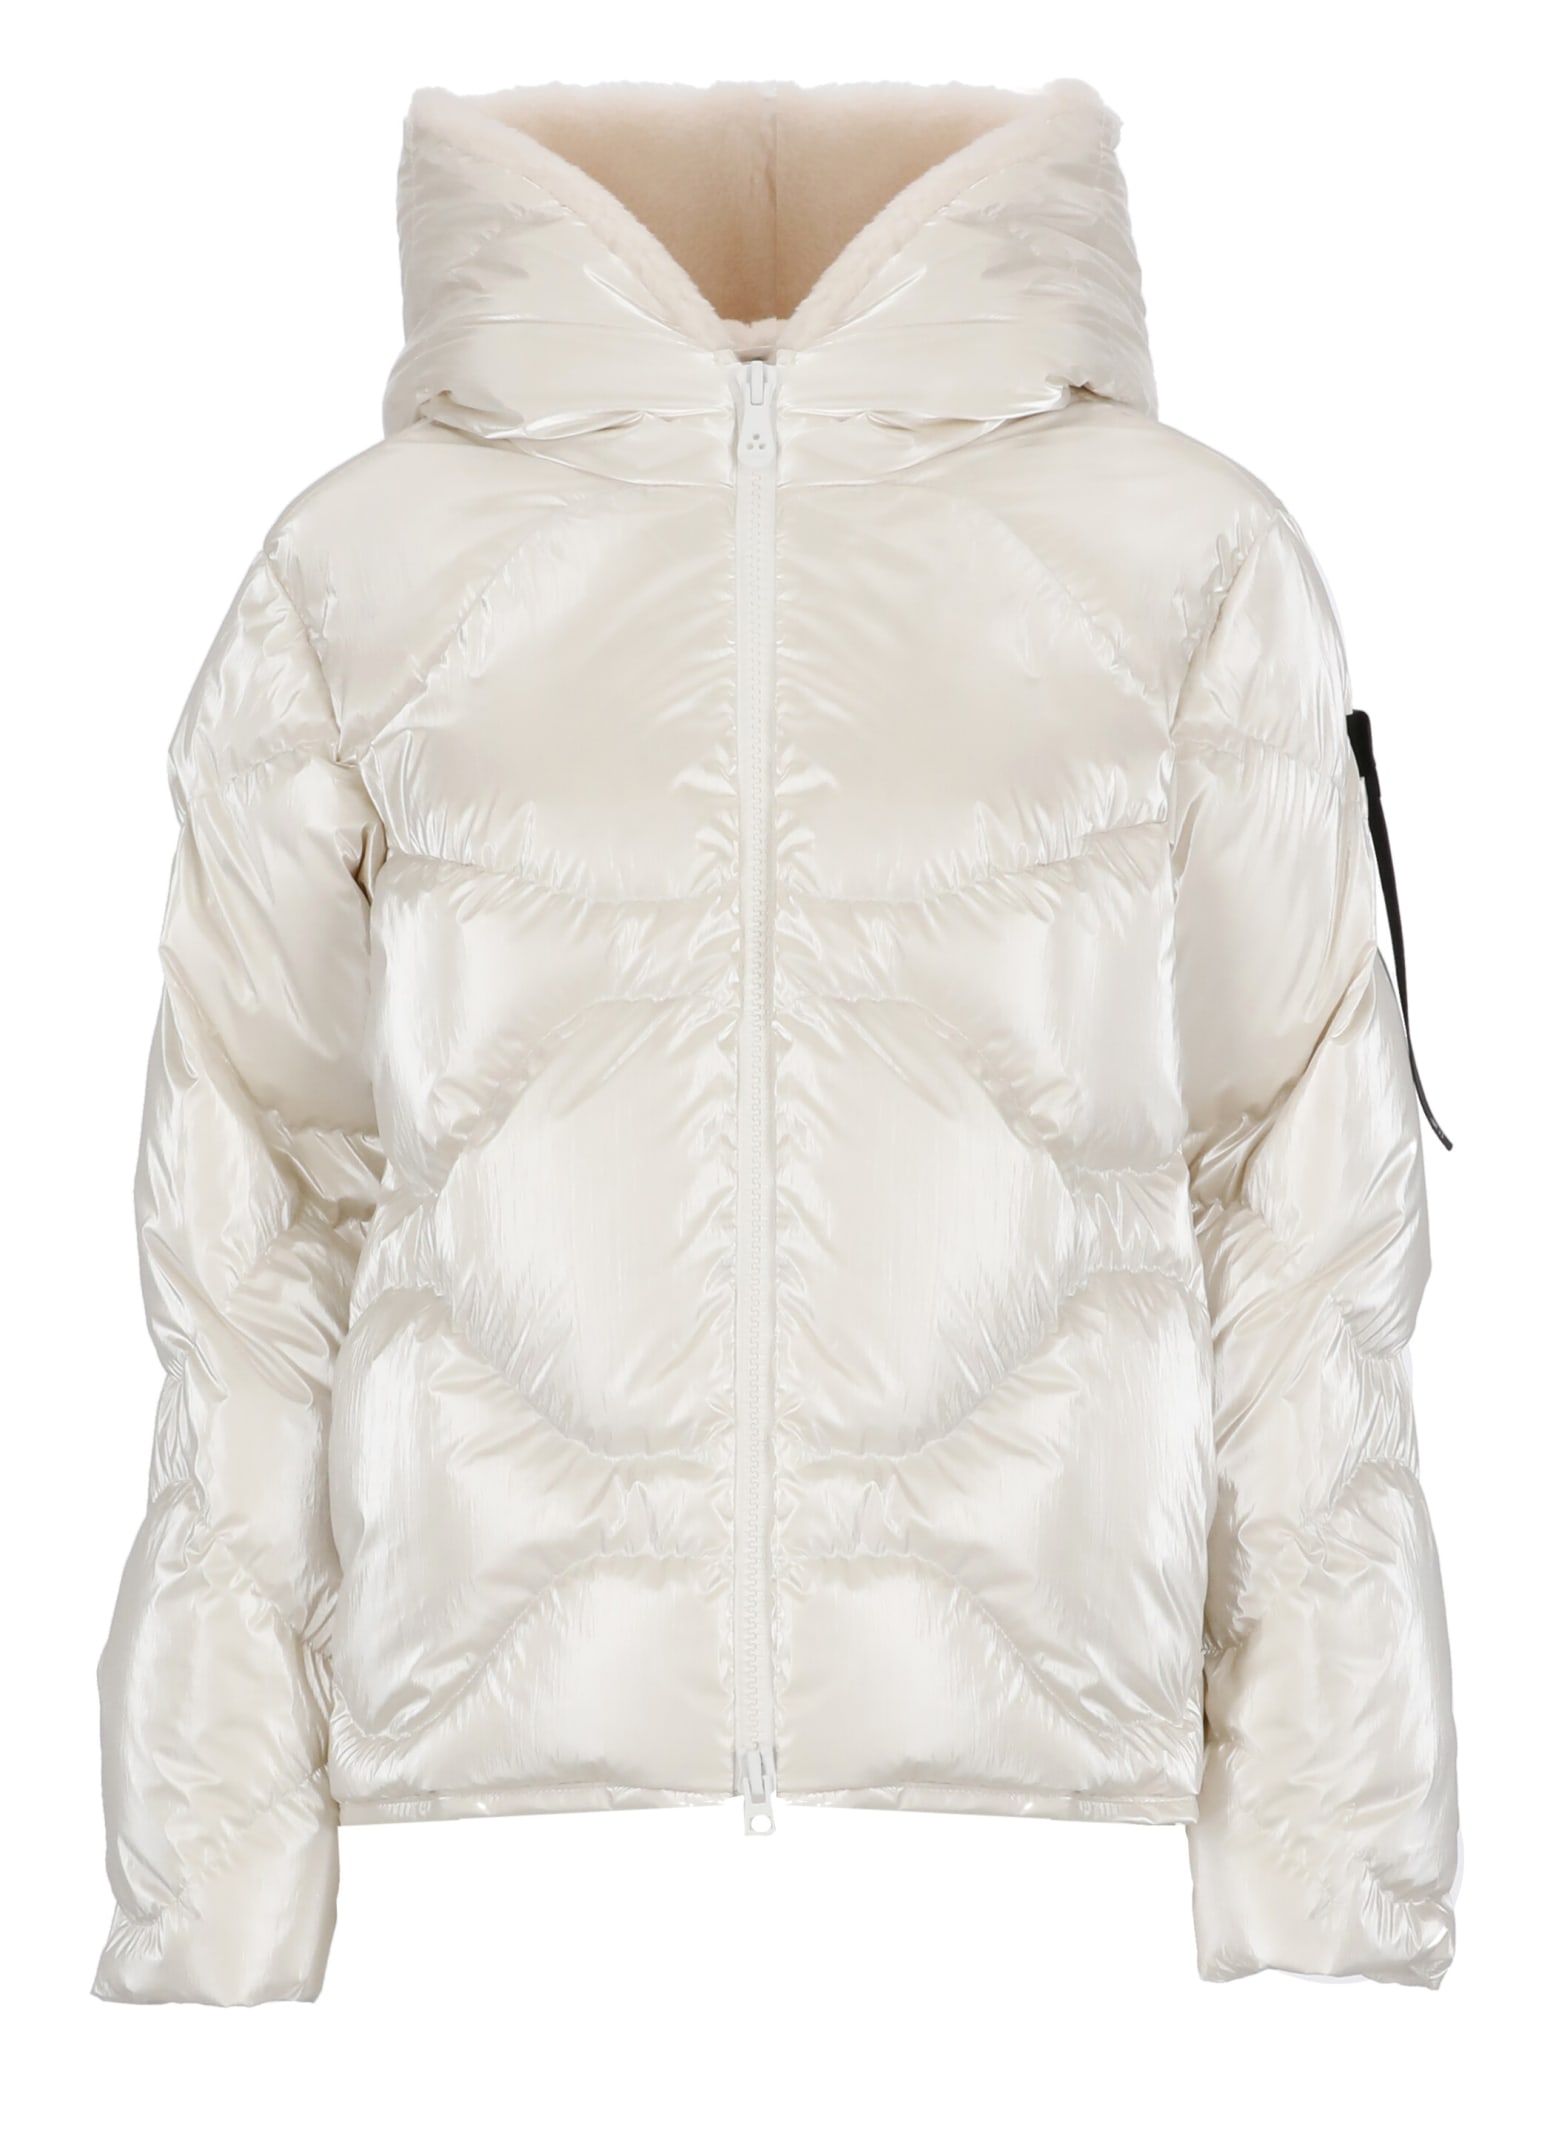 Peuterey Quilted Down Jacket